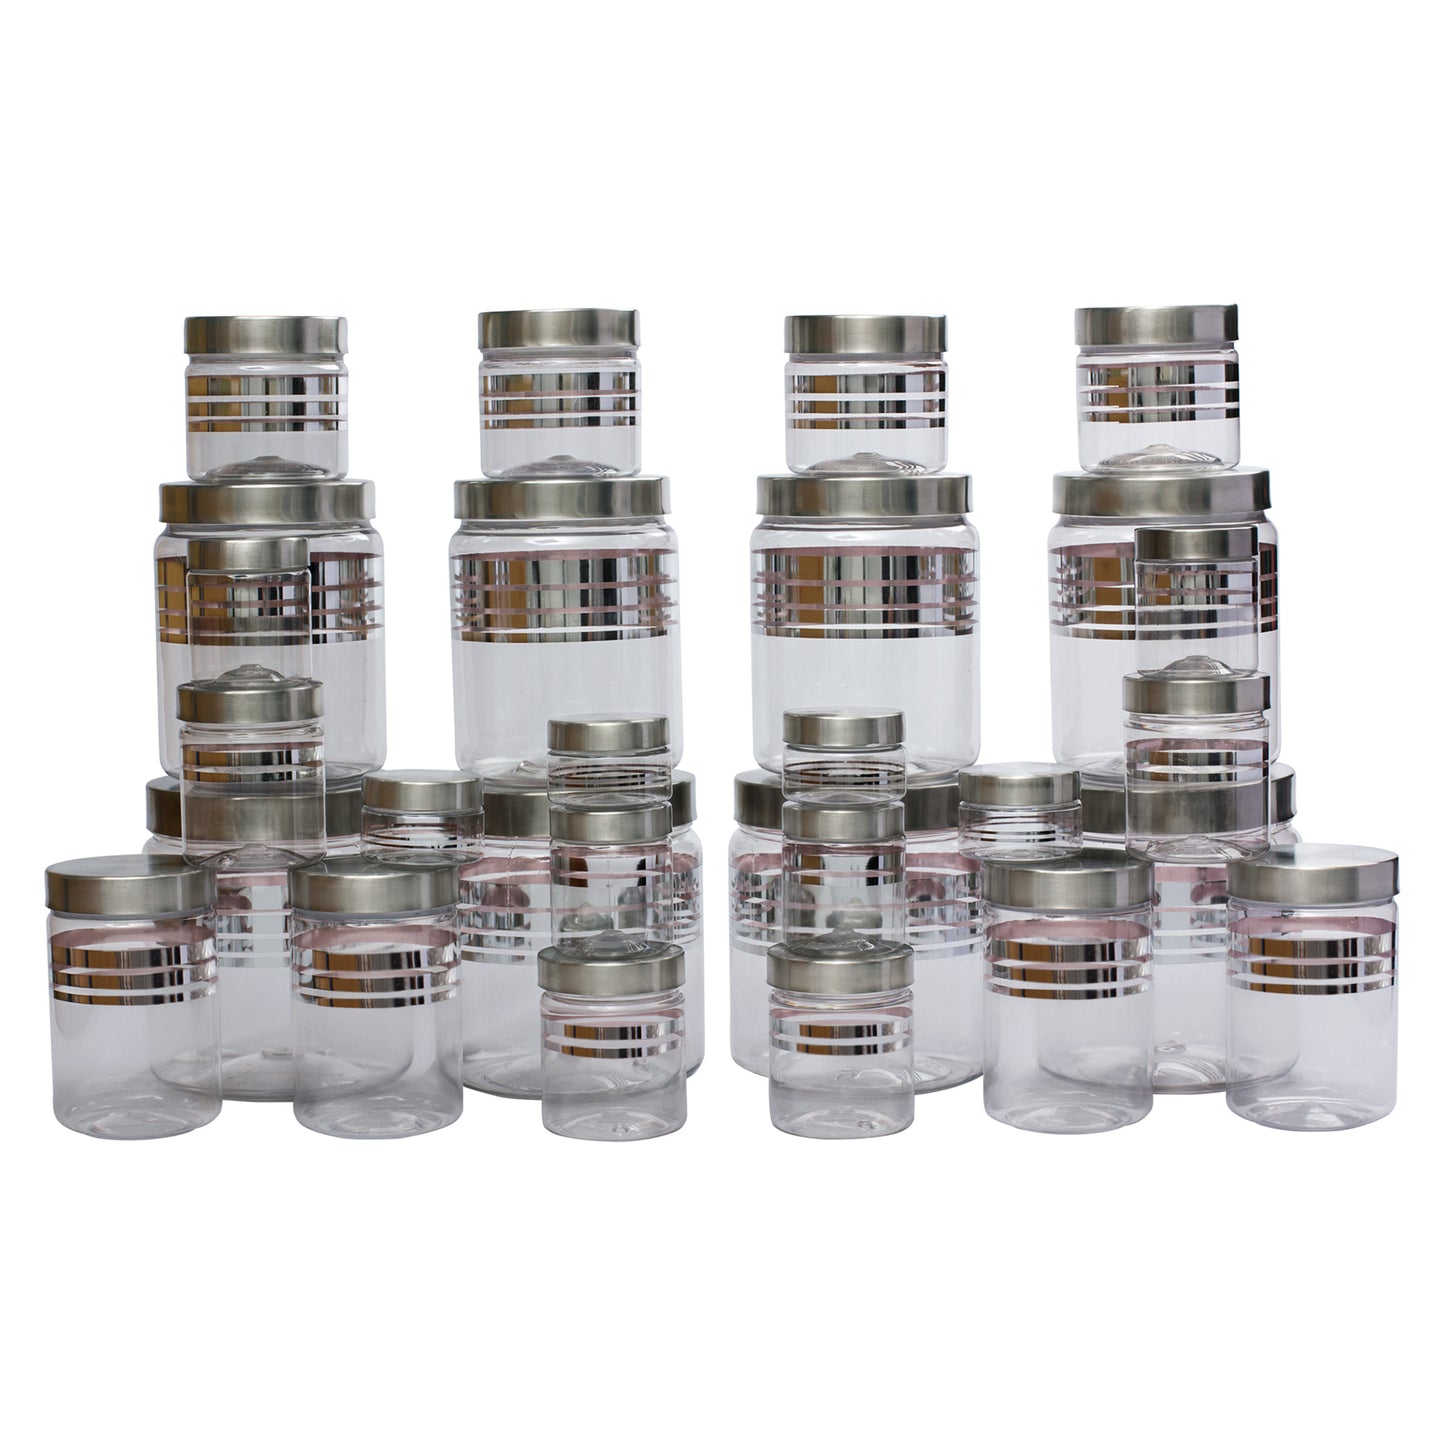 Silver Line Container - Pack of 28 - 1500ml, 1000ml, 450ml, 300ml, 200ml, 100ml, 50ml